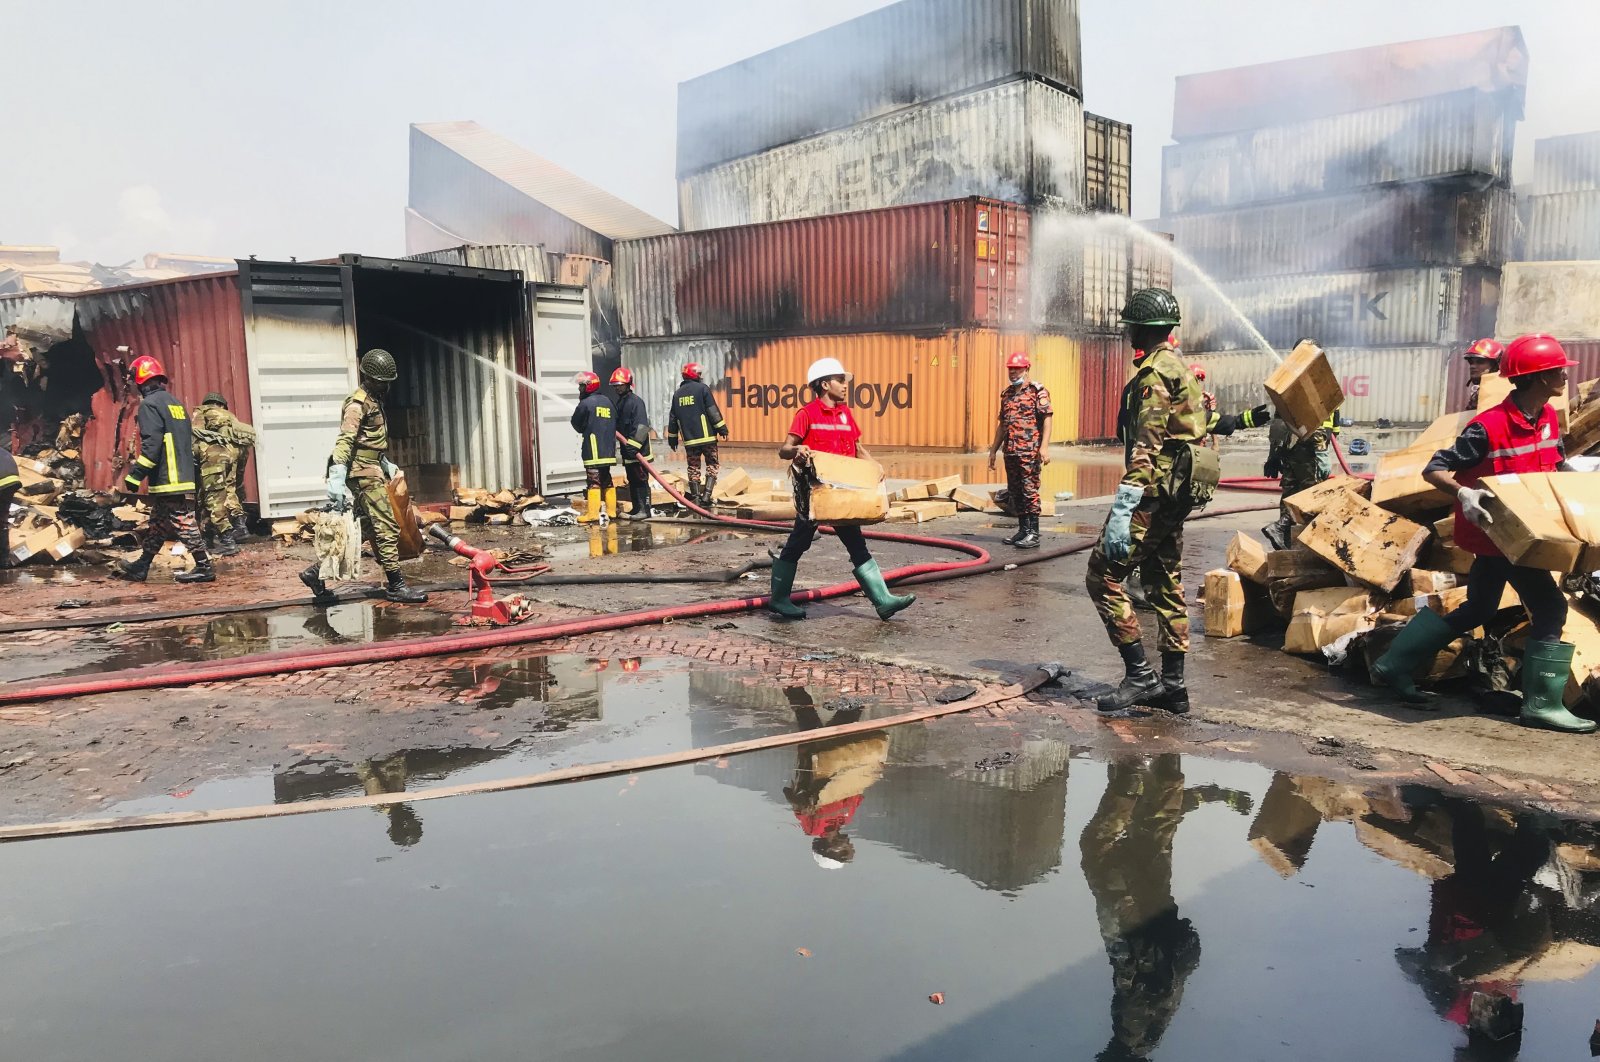 Rescuers try to salvage the remains as smoke continues to come out of containers at the BM Inland Container Depot, where a fire broke out around midnight Saturday in Chittagong, about 210 kilometers (130 miles) southeast of, Dhaka, Bangladesh, June 6, 2022. (AP Photo)